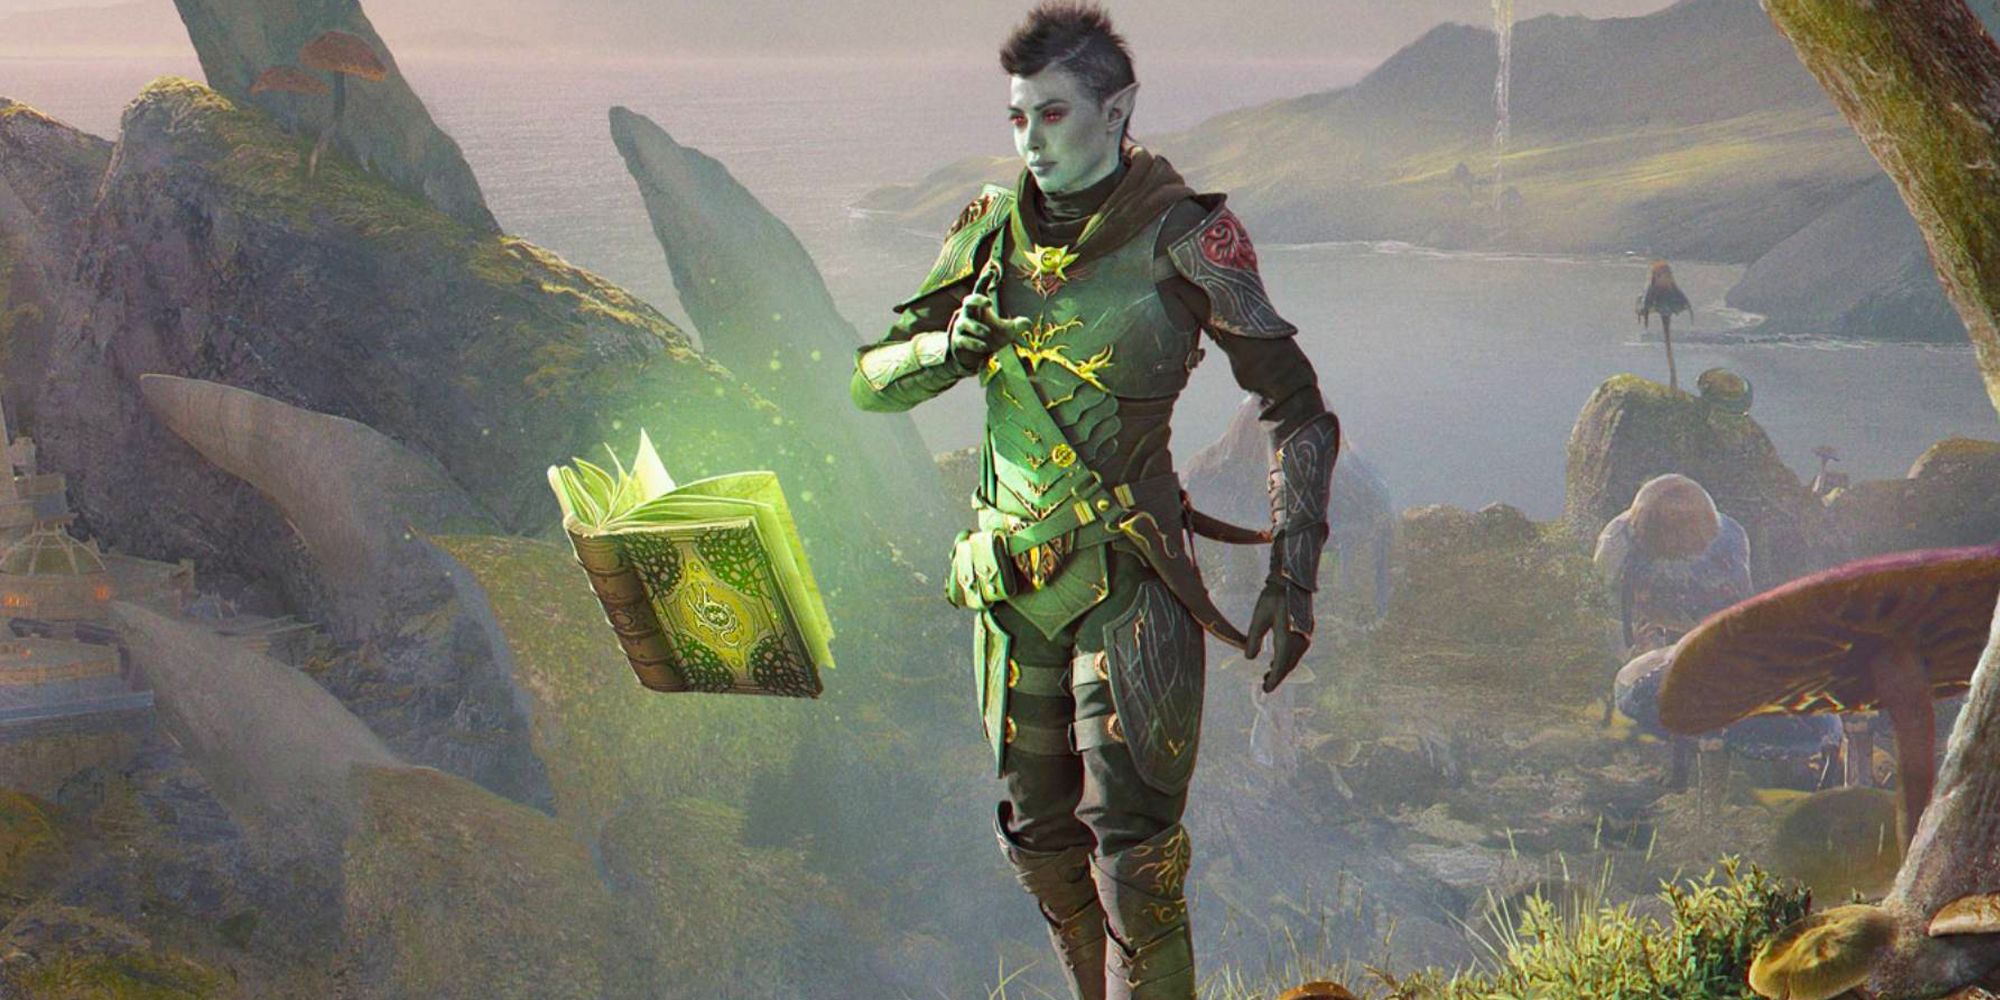 ESO Arcanist standing on a cliff in Morrowind reading a floating, green-glowing book